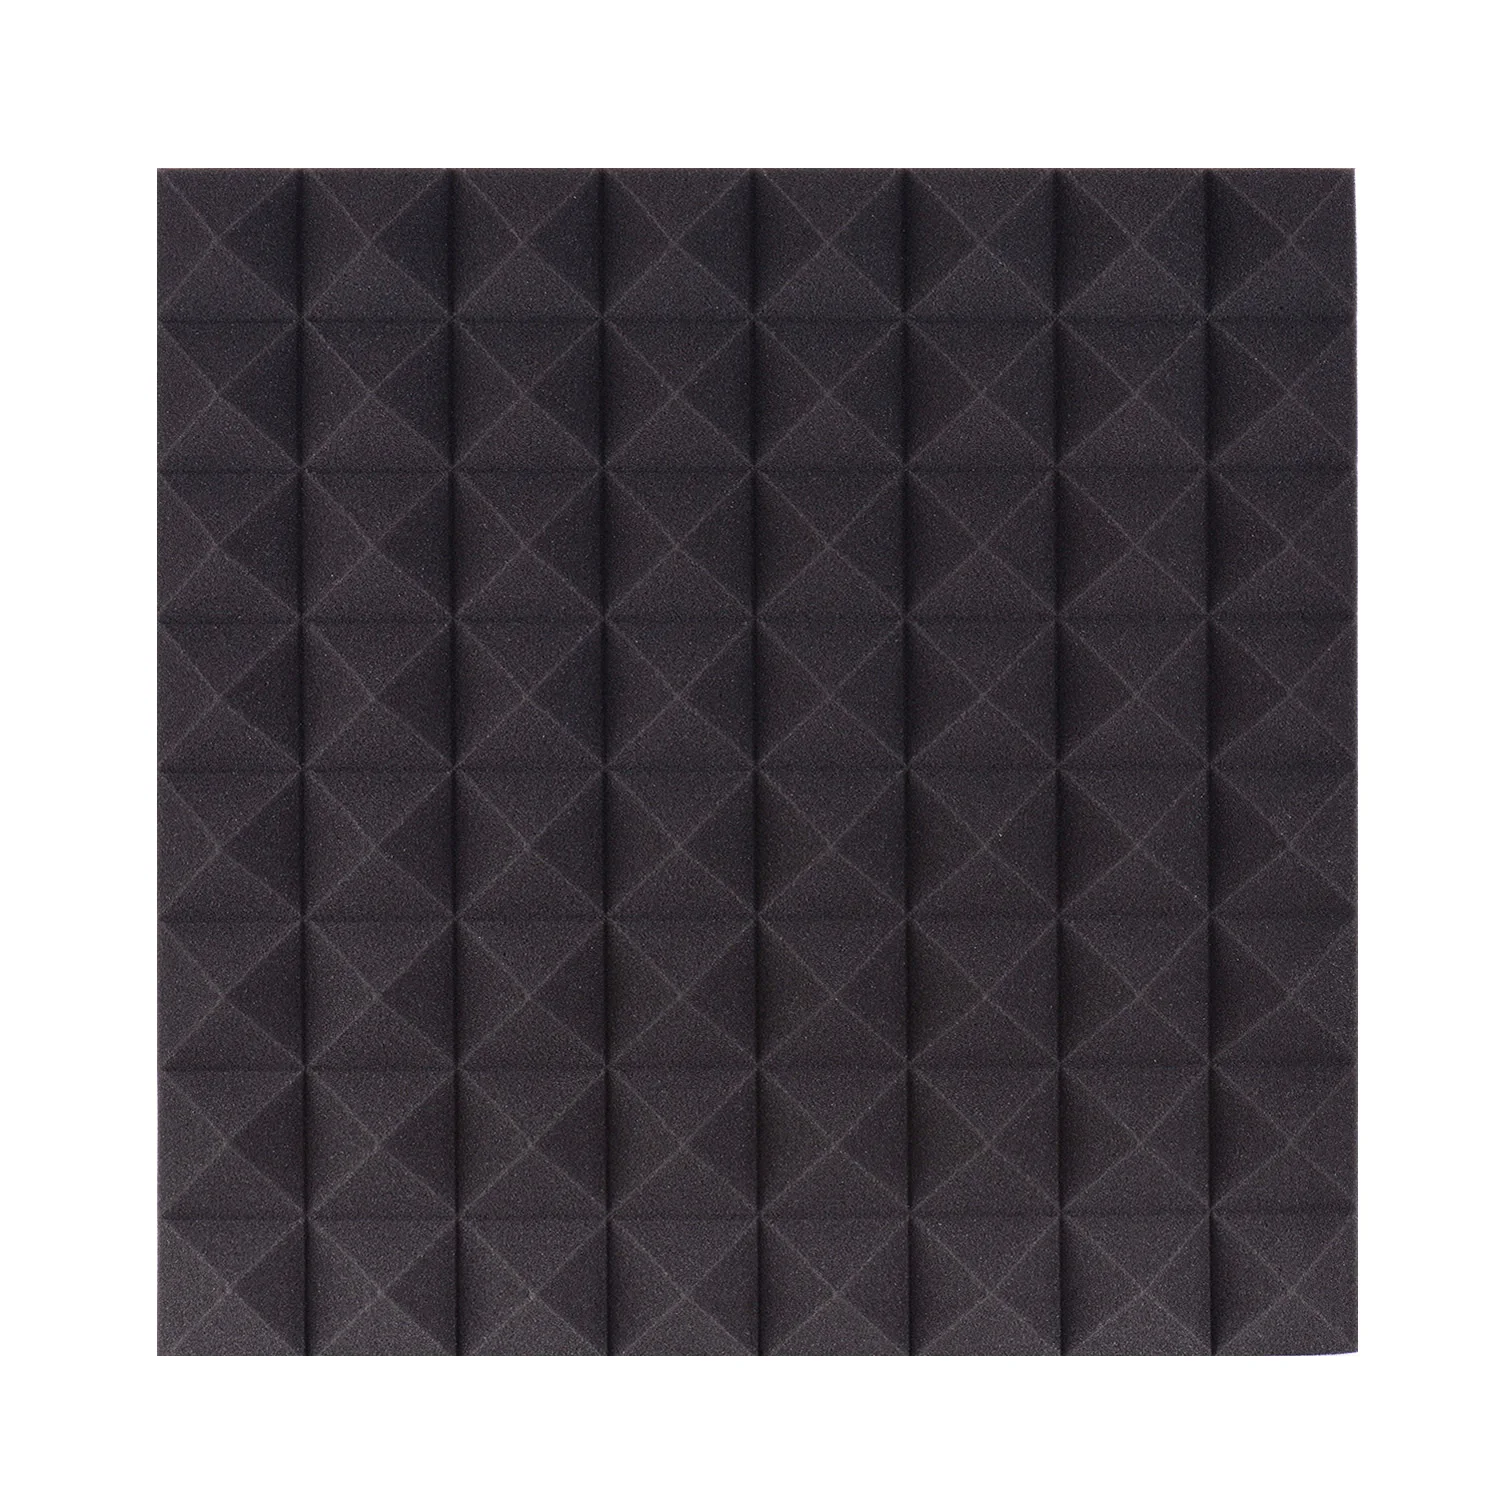 

6PCS 20X20X2 Inches Acoustic Foam Panels Soundproof Foams Panels Wedges for Studio Home Walls Ceiling Sound Absorbing Insulation